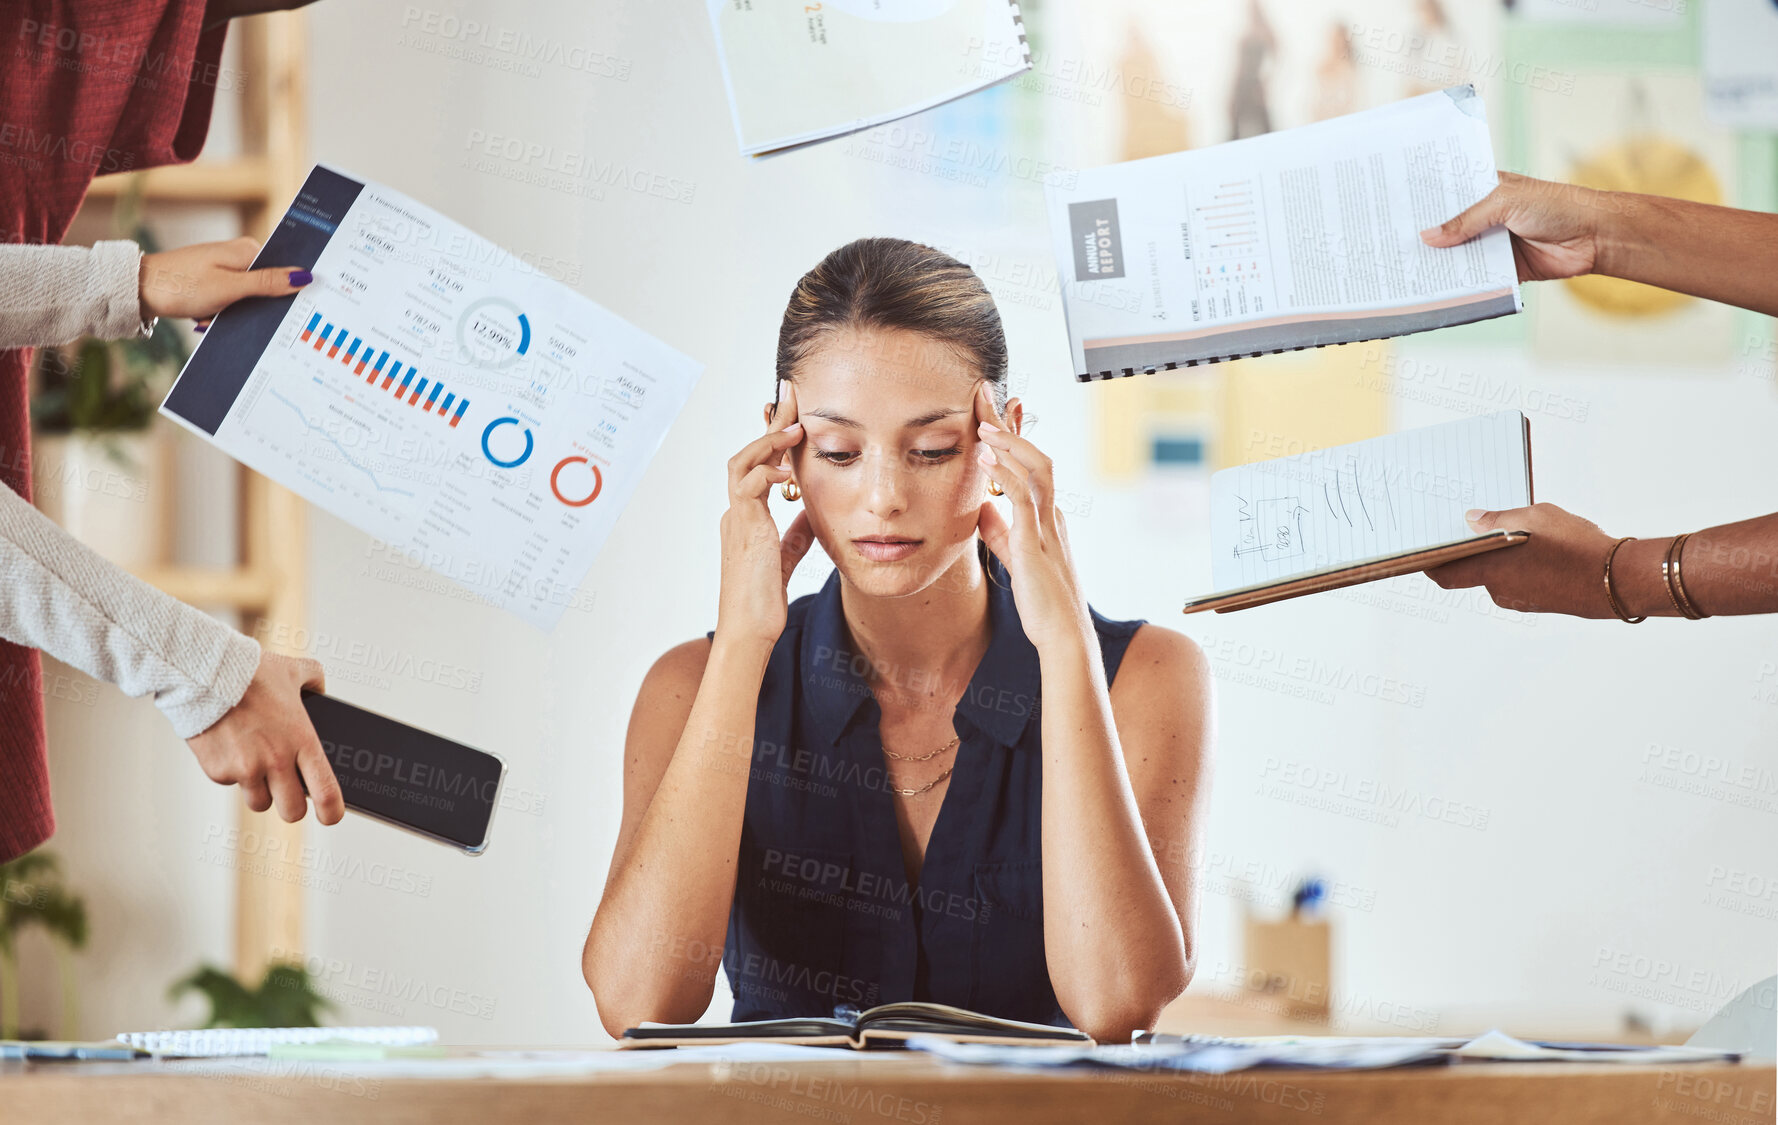 Buy stock photo Stress, headache and burnout with business woman feeling overwhelmed by a busy schedule and deadline in an office. Corporate employee suffering anxiety and mental breakdown from workload and tasks